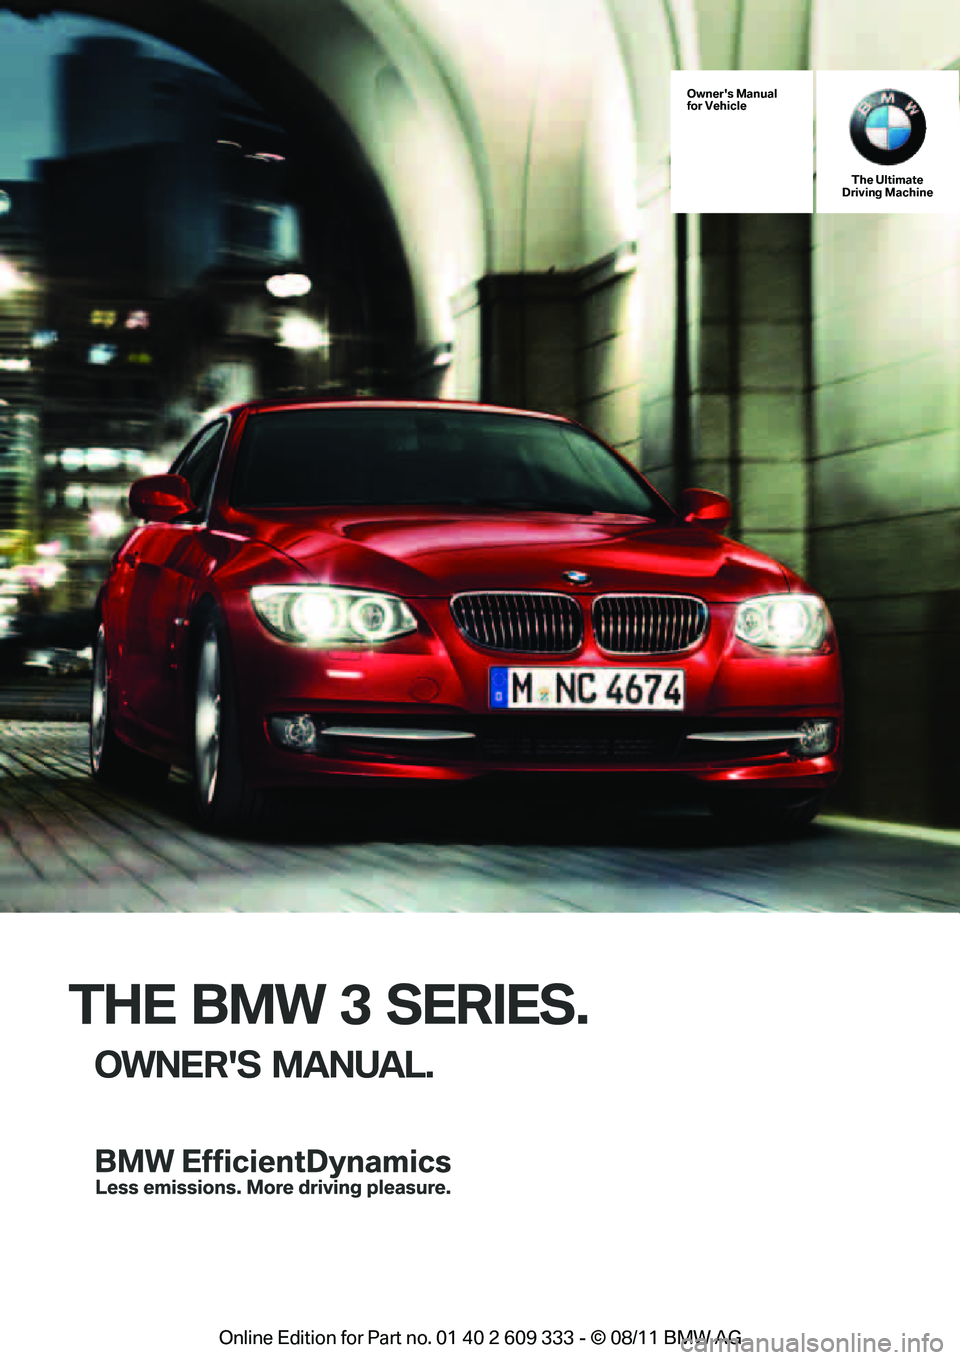 BMW 328I CONVERTIBLE 2012  Owners Manual THE BMW 3 SERIES.
OWNERS MANUAL.
Owners Manual
for VehicleThe Ultimate
Driving Machine
Online  Edition  for Part  no. 01 40 2 609  333 - \251  08/11  BMW AG  